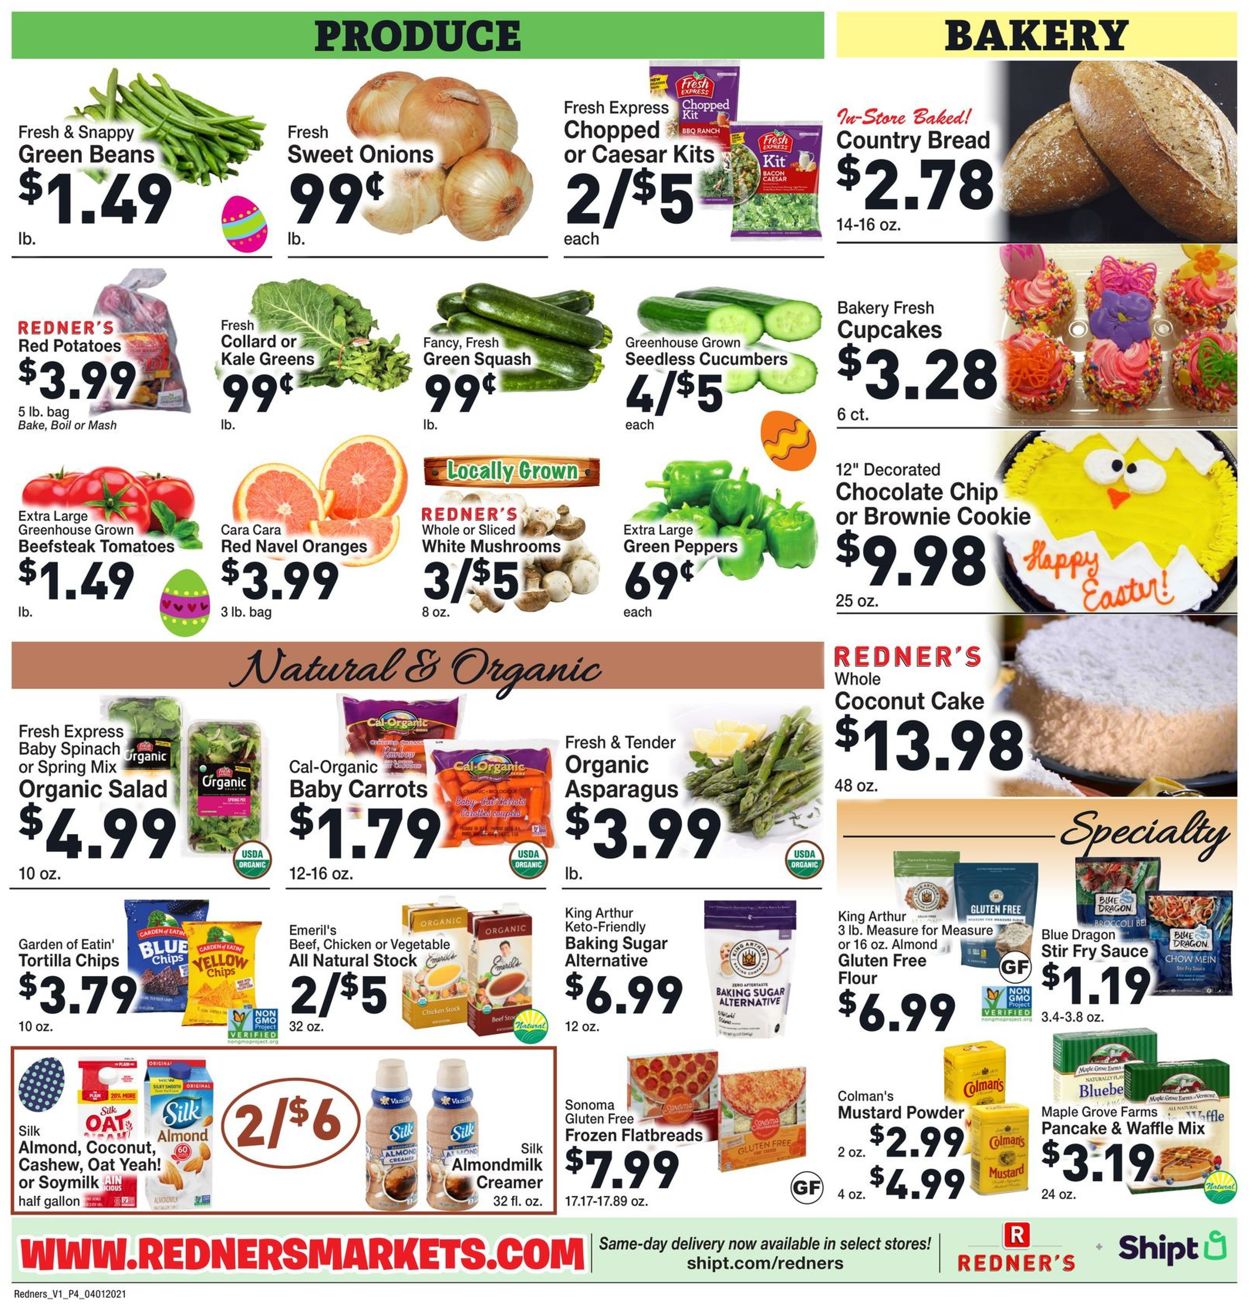 Redner’s Warehouse Market - Easter 2021 Ad Weekly Ad Circular - valid 04/01-04/07/2021 (Page 6)